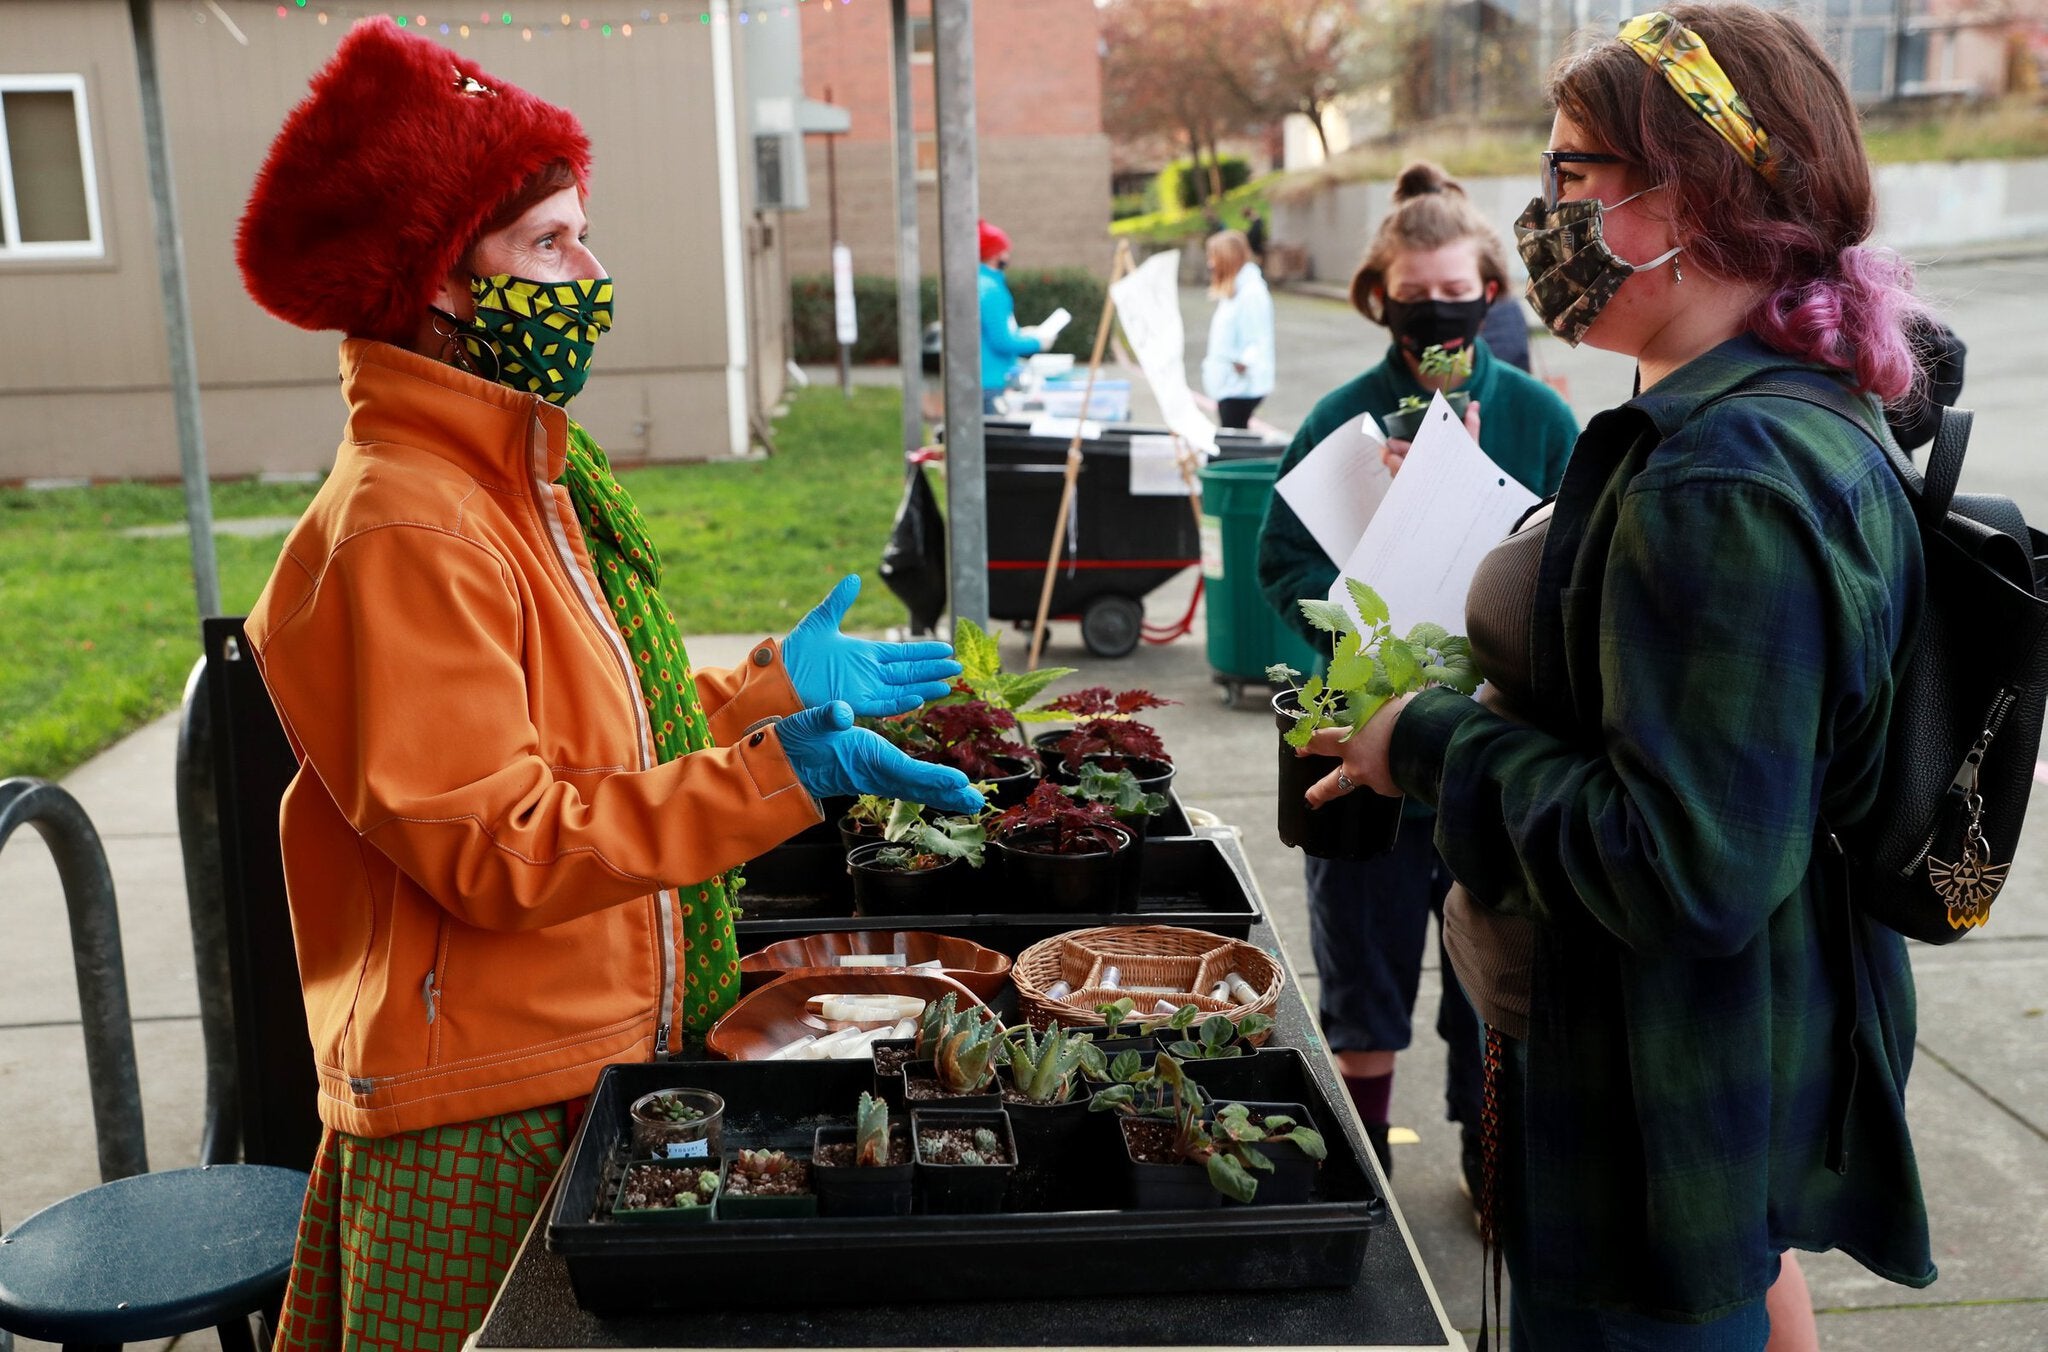 About every two weeks, India Carlson, a botany and environmental horticulture teacher at Ballard High School, dons a mask and gloves, carts out trays of plants to the back of the school, and gives plants to students like Kate Williamson, 17, right. (Erika Schultz / The Seattle Times)